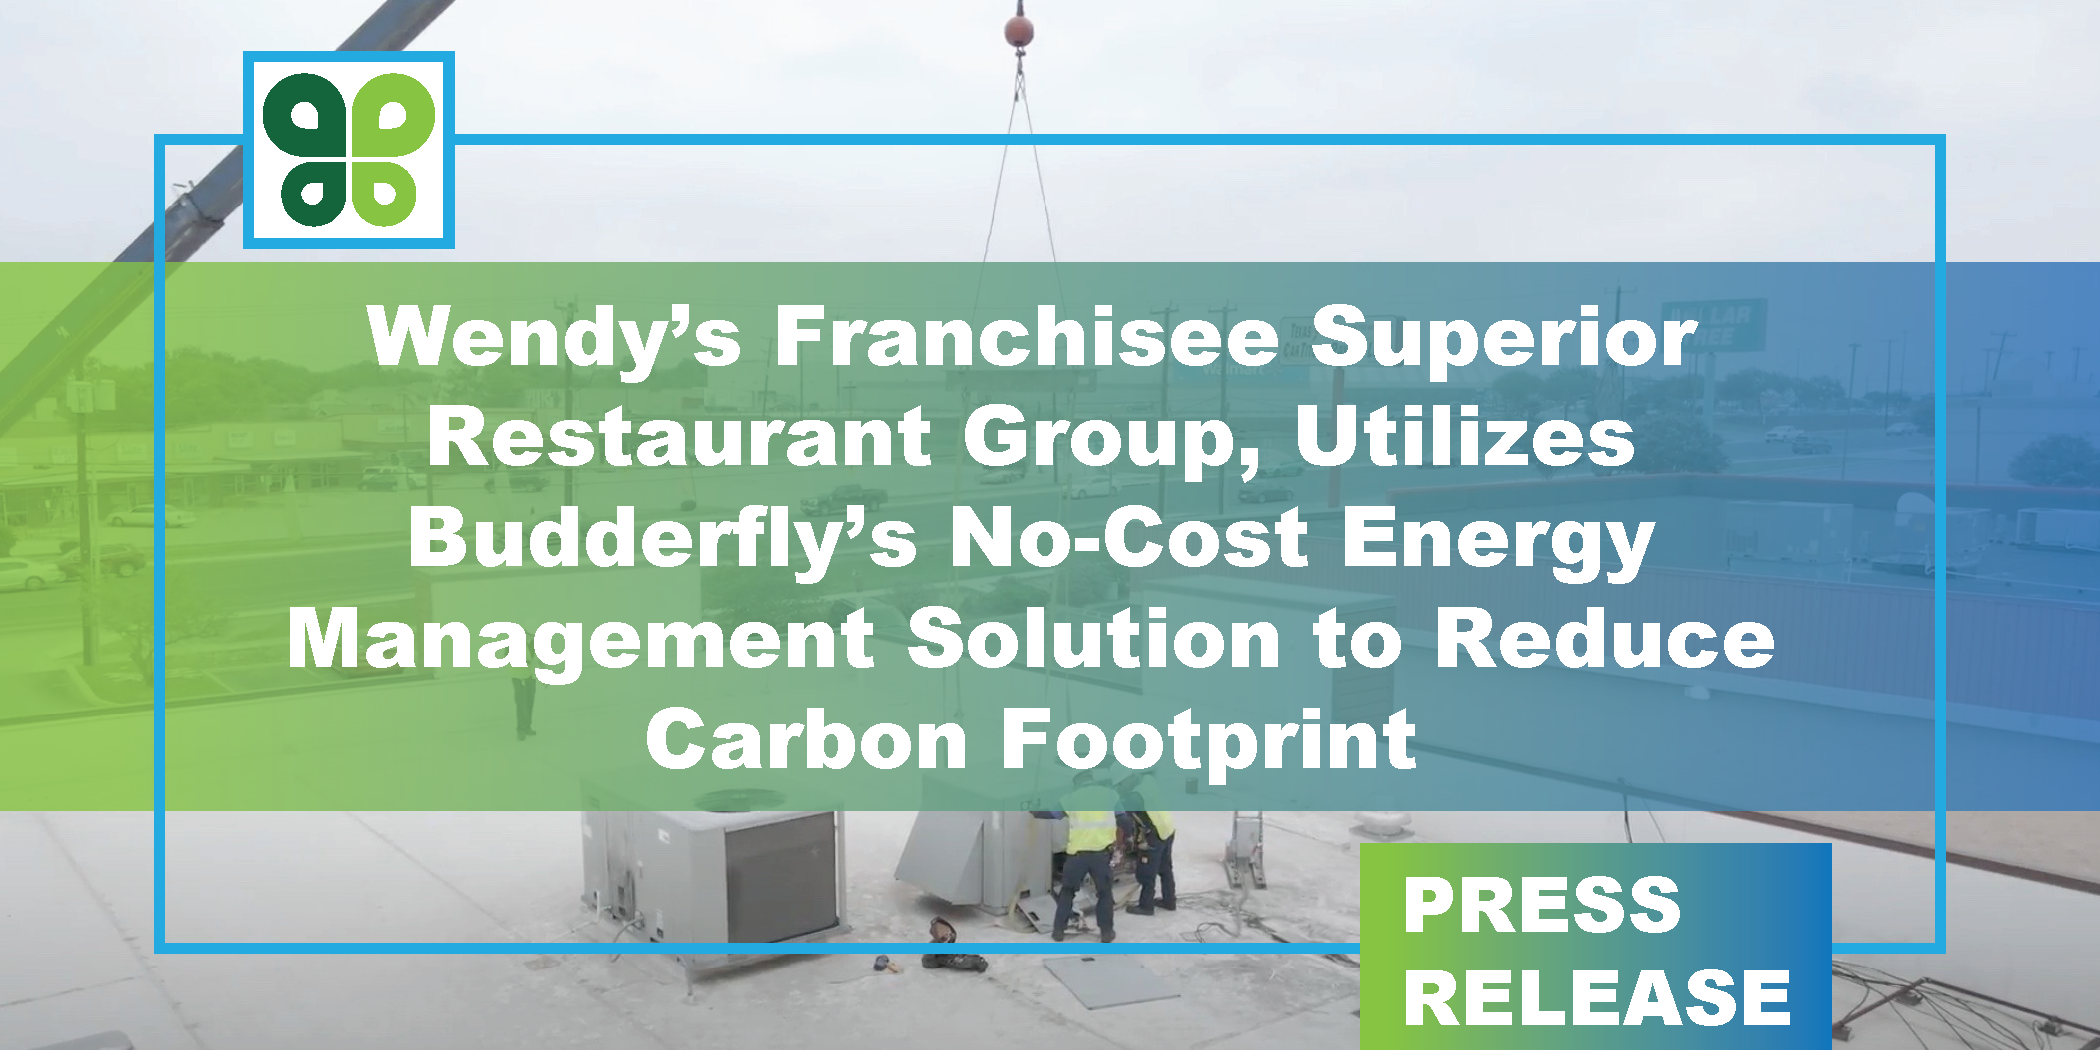 Wendy’s Franchisee Utilizes Budderfly’s No-Cost Energy Management Solution to Reduce Carbon Footprint